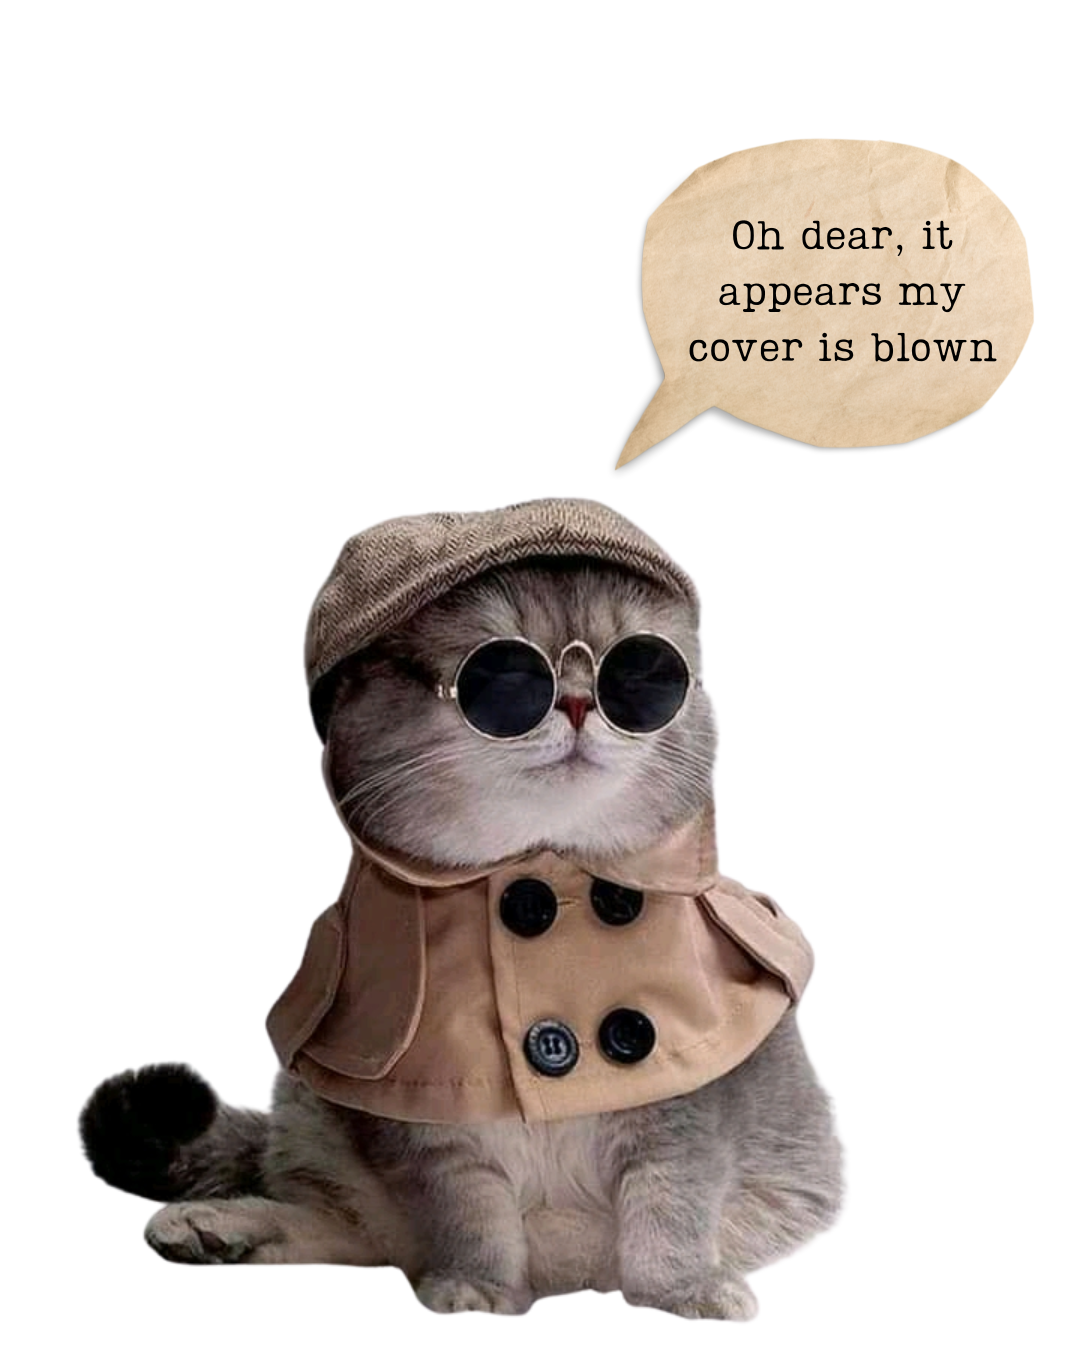 A cat dressed as Sherlock Holmes saying "Oh dear, it appears my cover is blown", for no reason other than I think it's funny